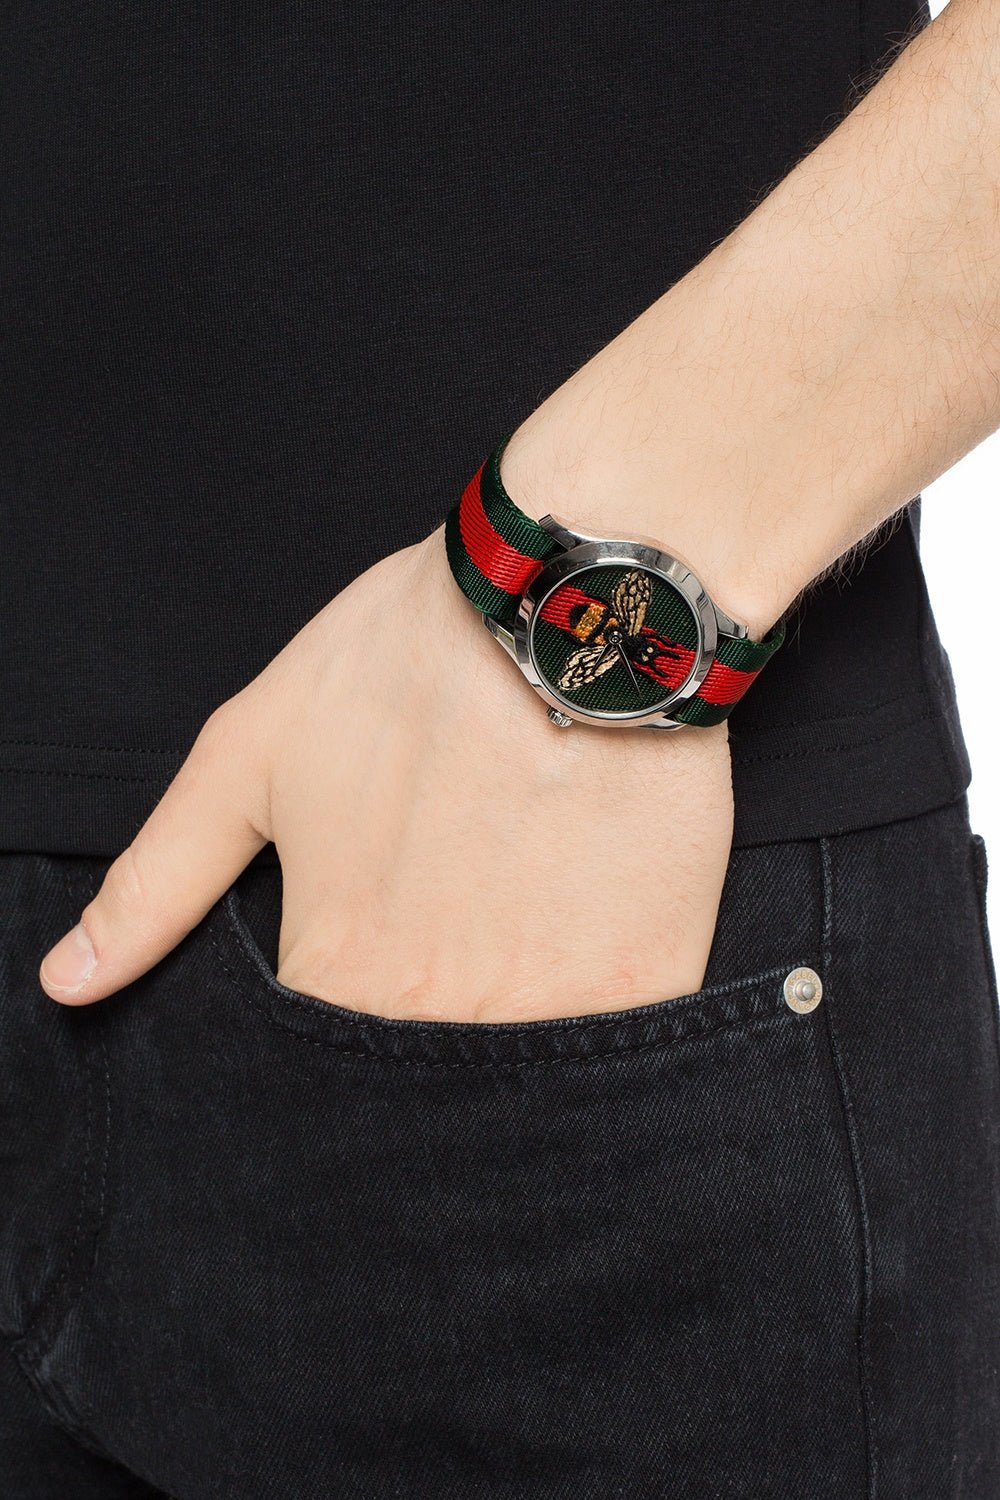 Gucci Le Marche des Merveilles Red & Green Dial Red & Green Nylon Strap Unisex Watch - YA1264060